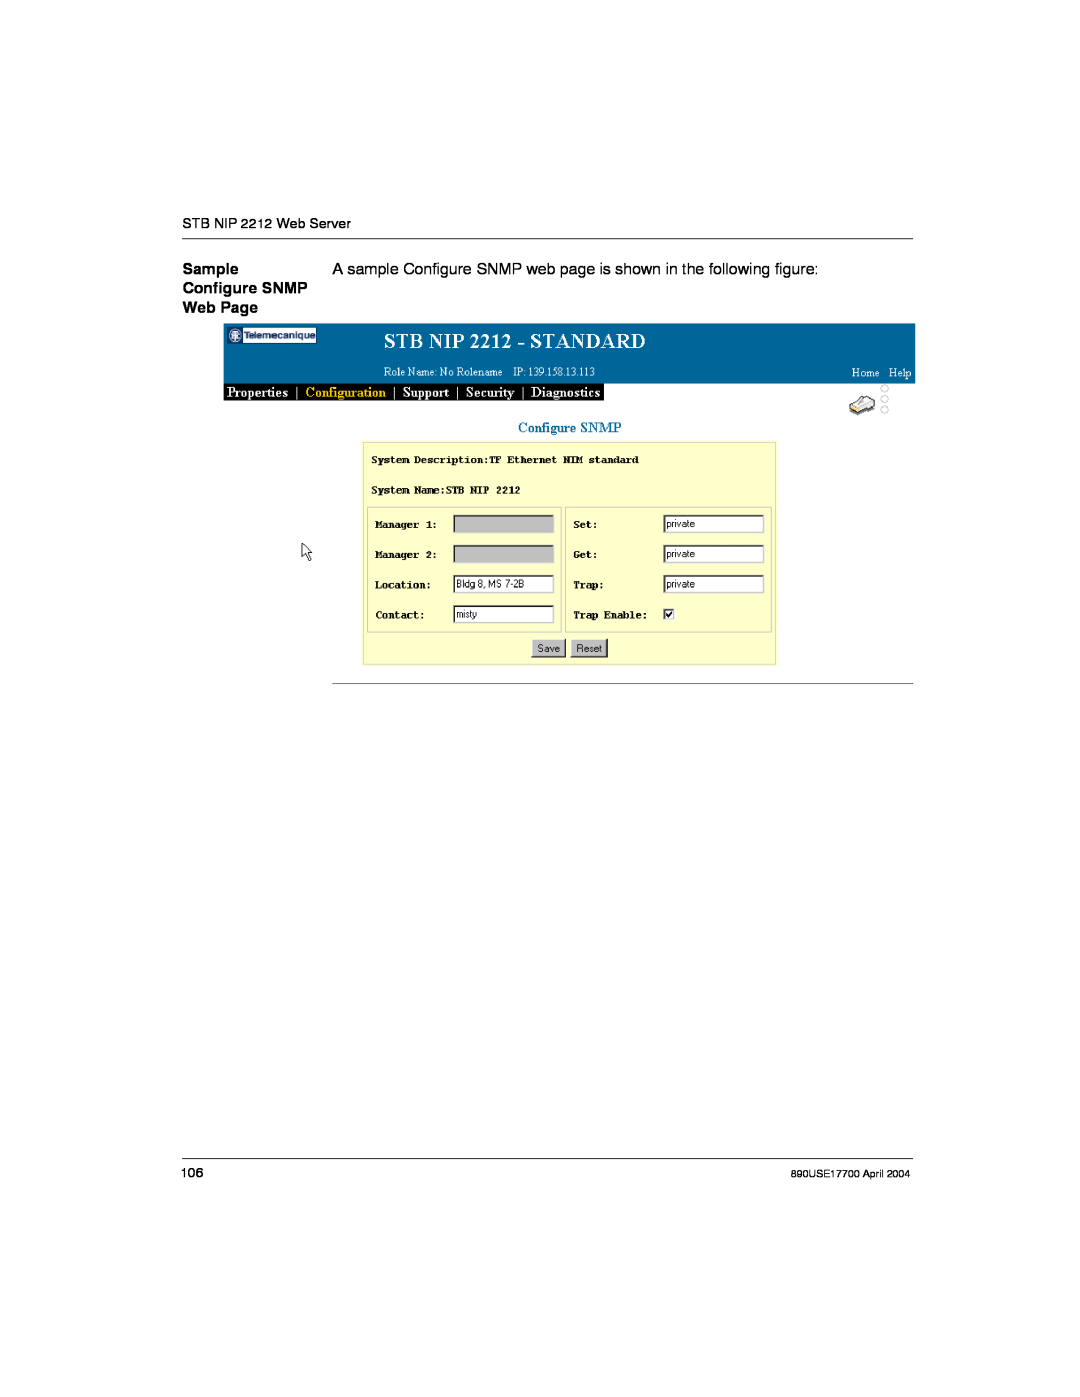 Schneider Electric 890USE17700 manual Sample, A sample Configure SNMP web page is shown in the following figure, Web Page 